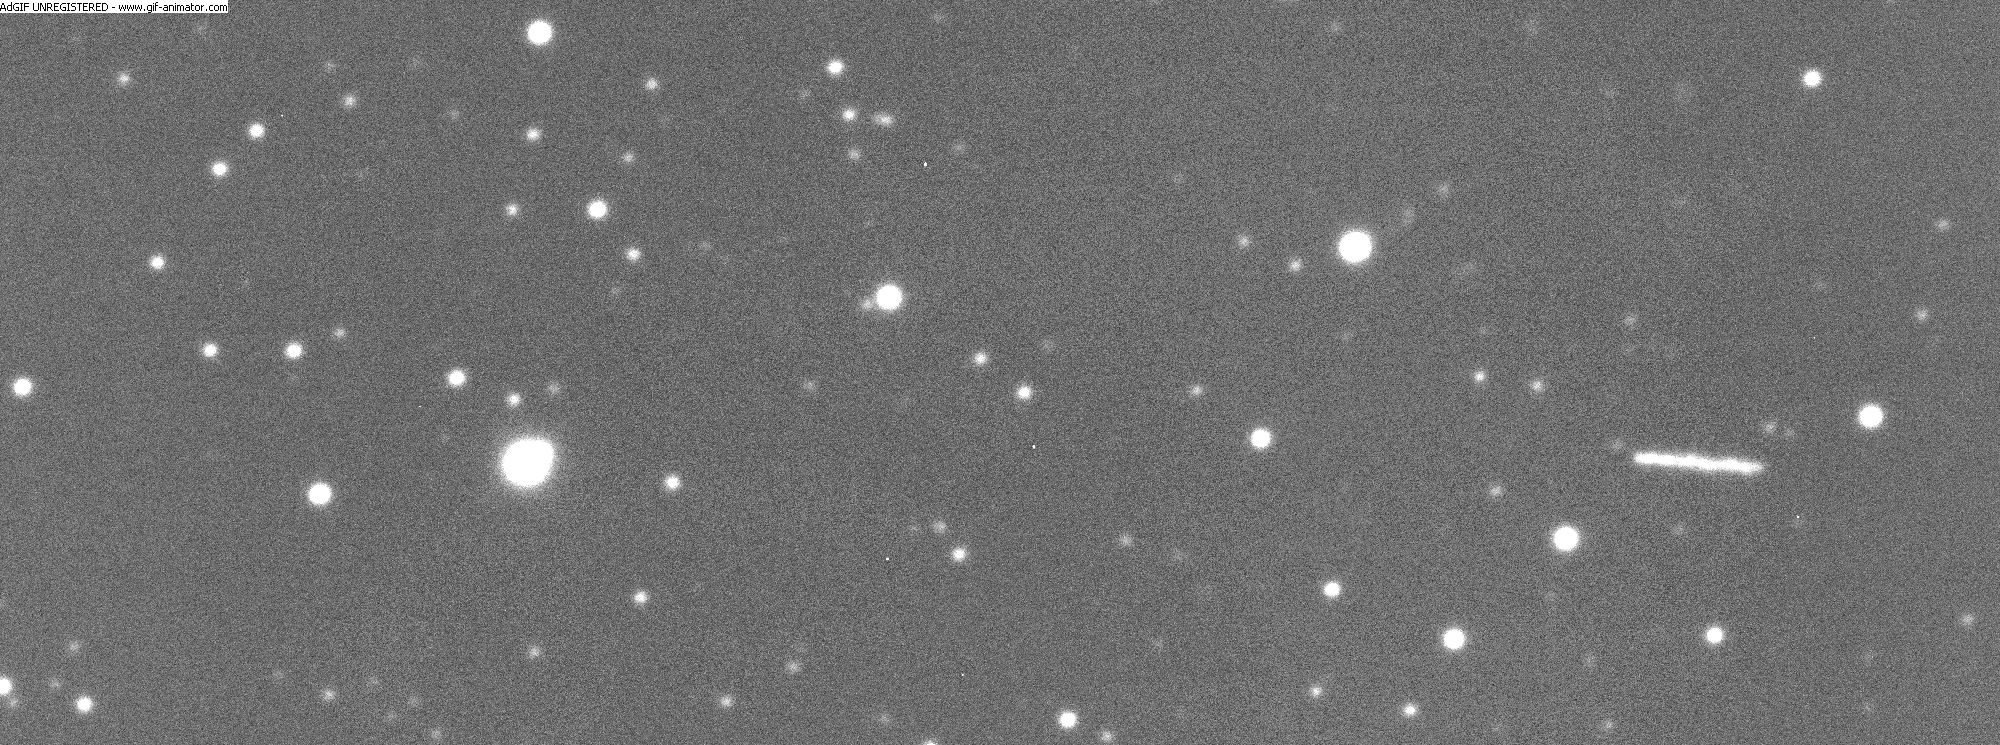 Animation of Close Approach of Asteroid 2013 XY8 imaged on 2013, December 10.6   by E. Guido & N. Howes photo animation_zps3b70bd1c.gif